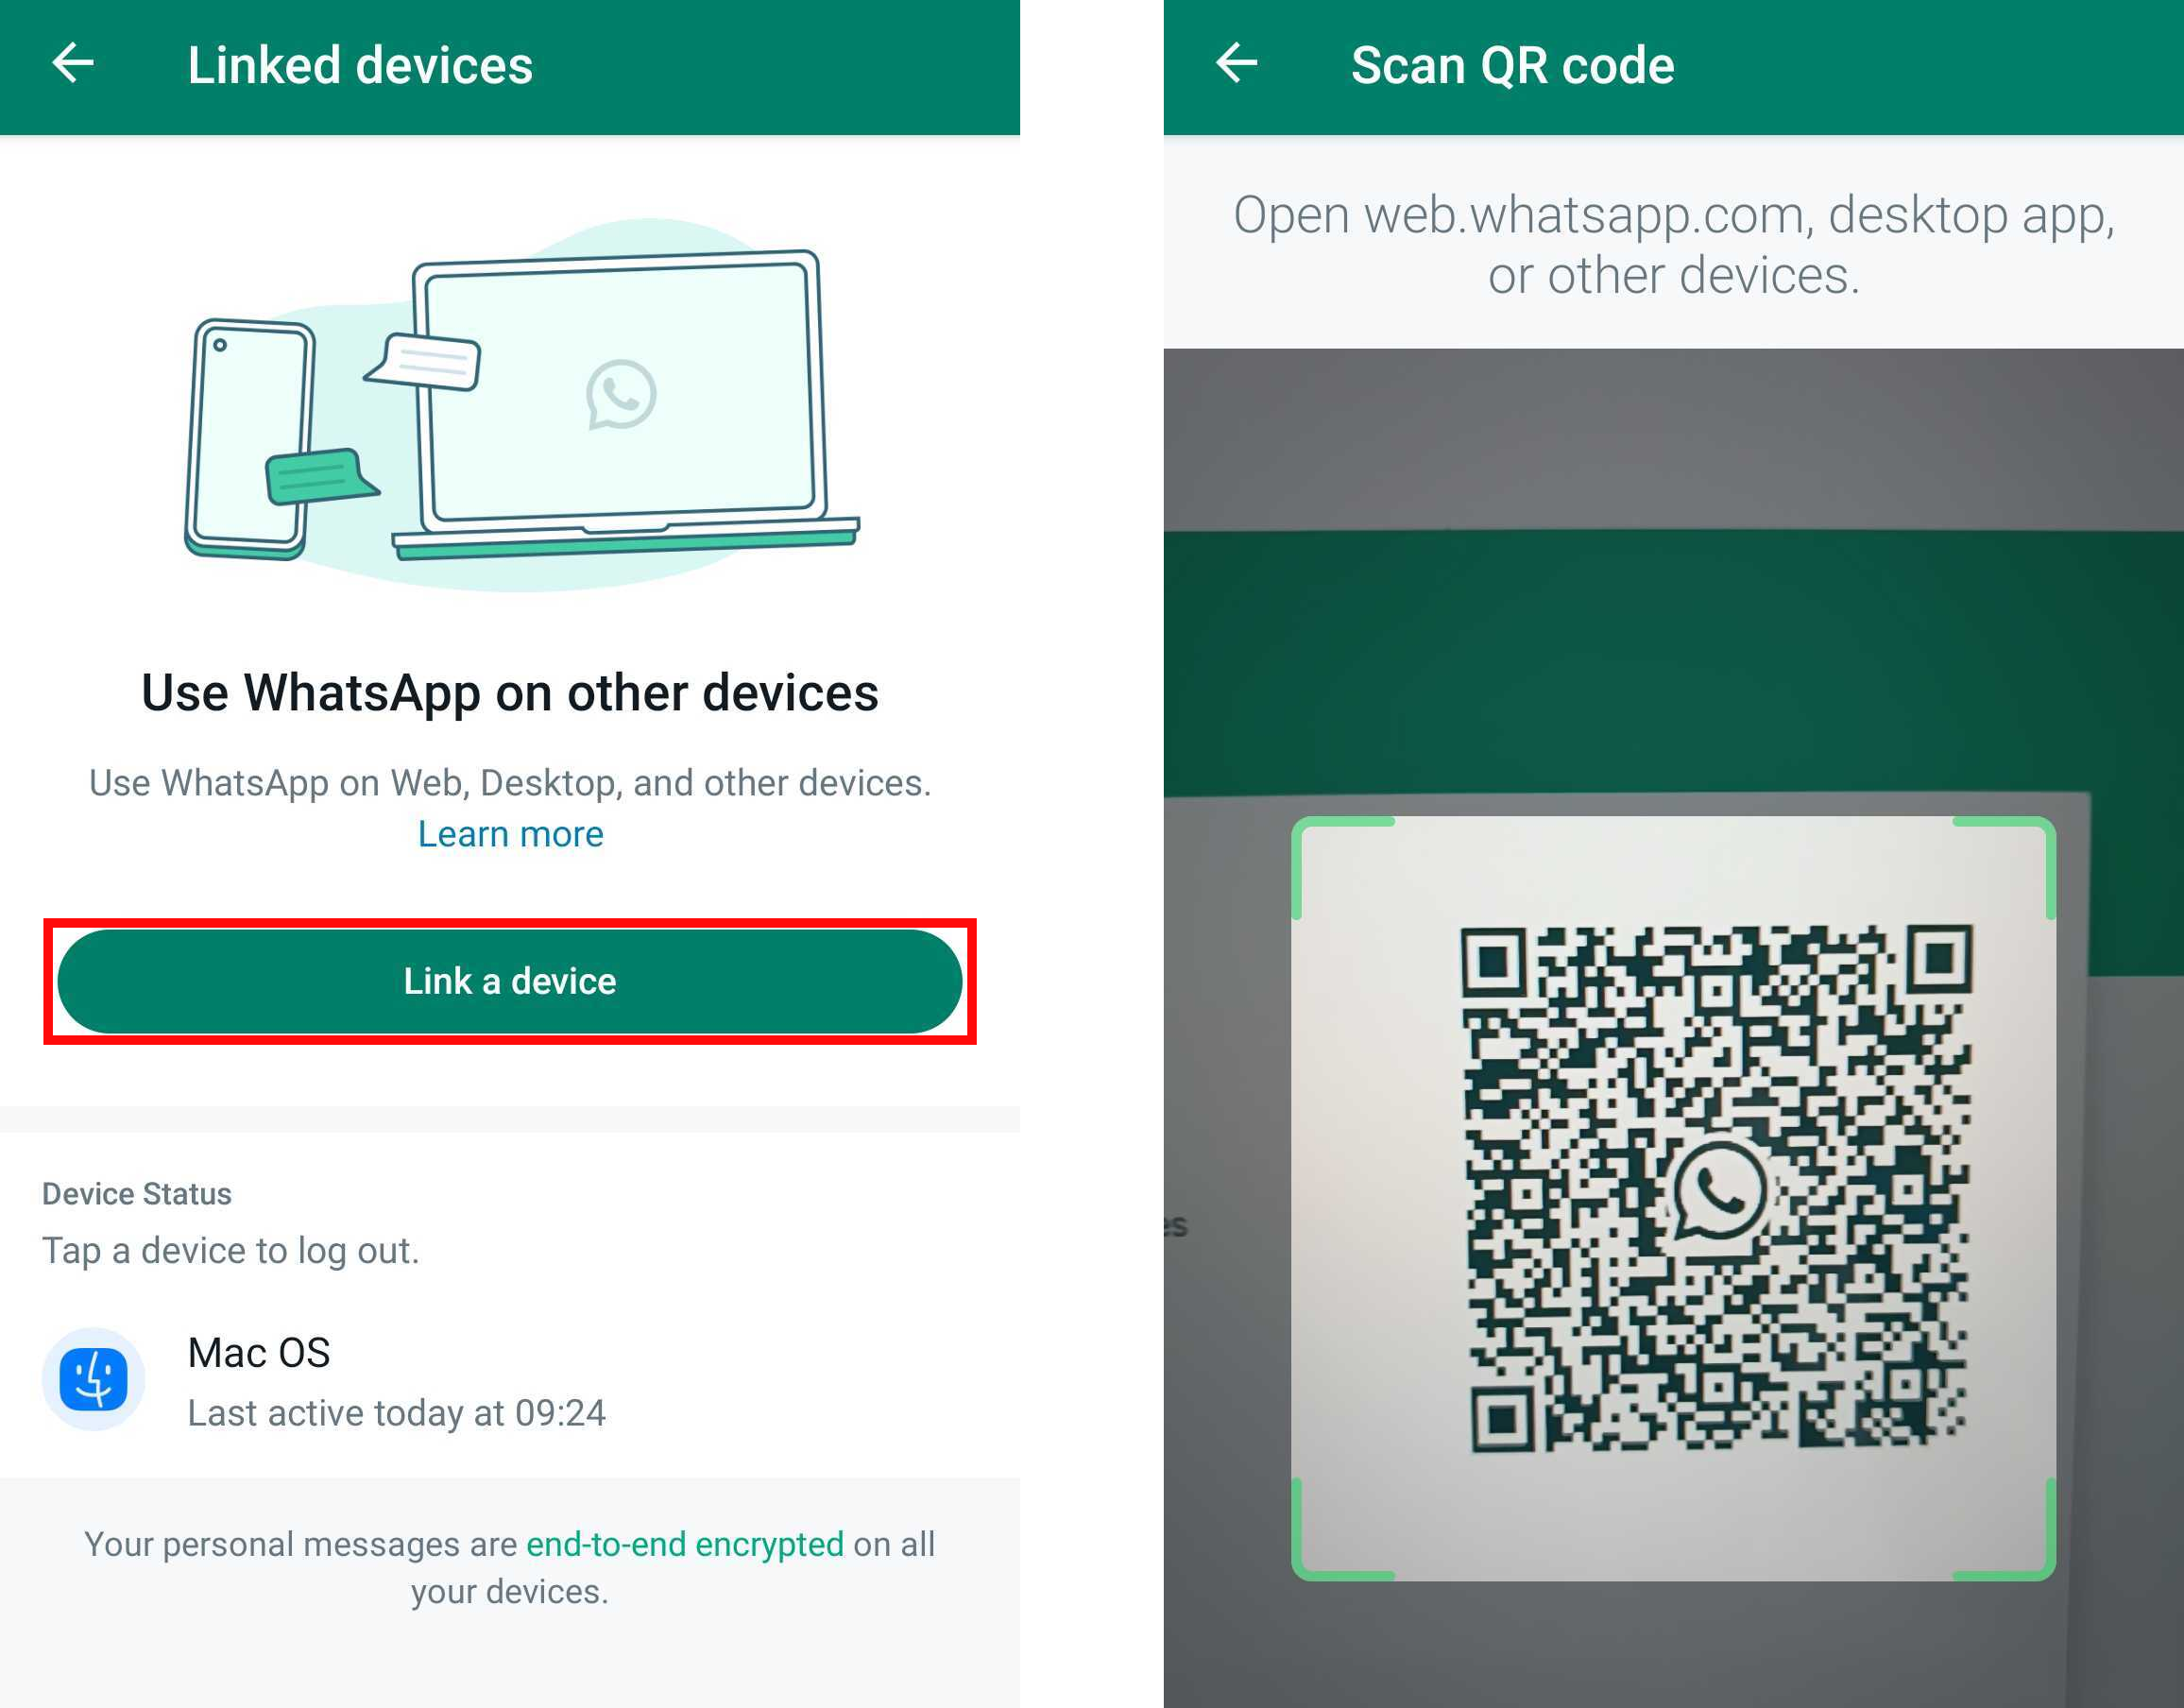 Log in to WhatsApp Web with linked devices settings